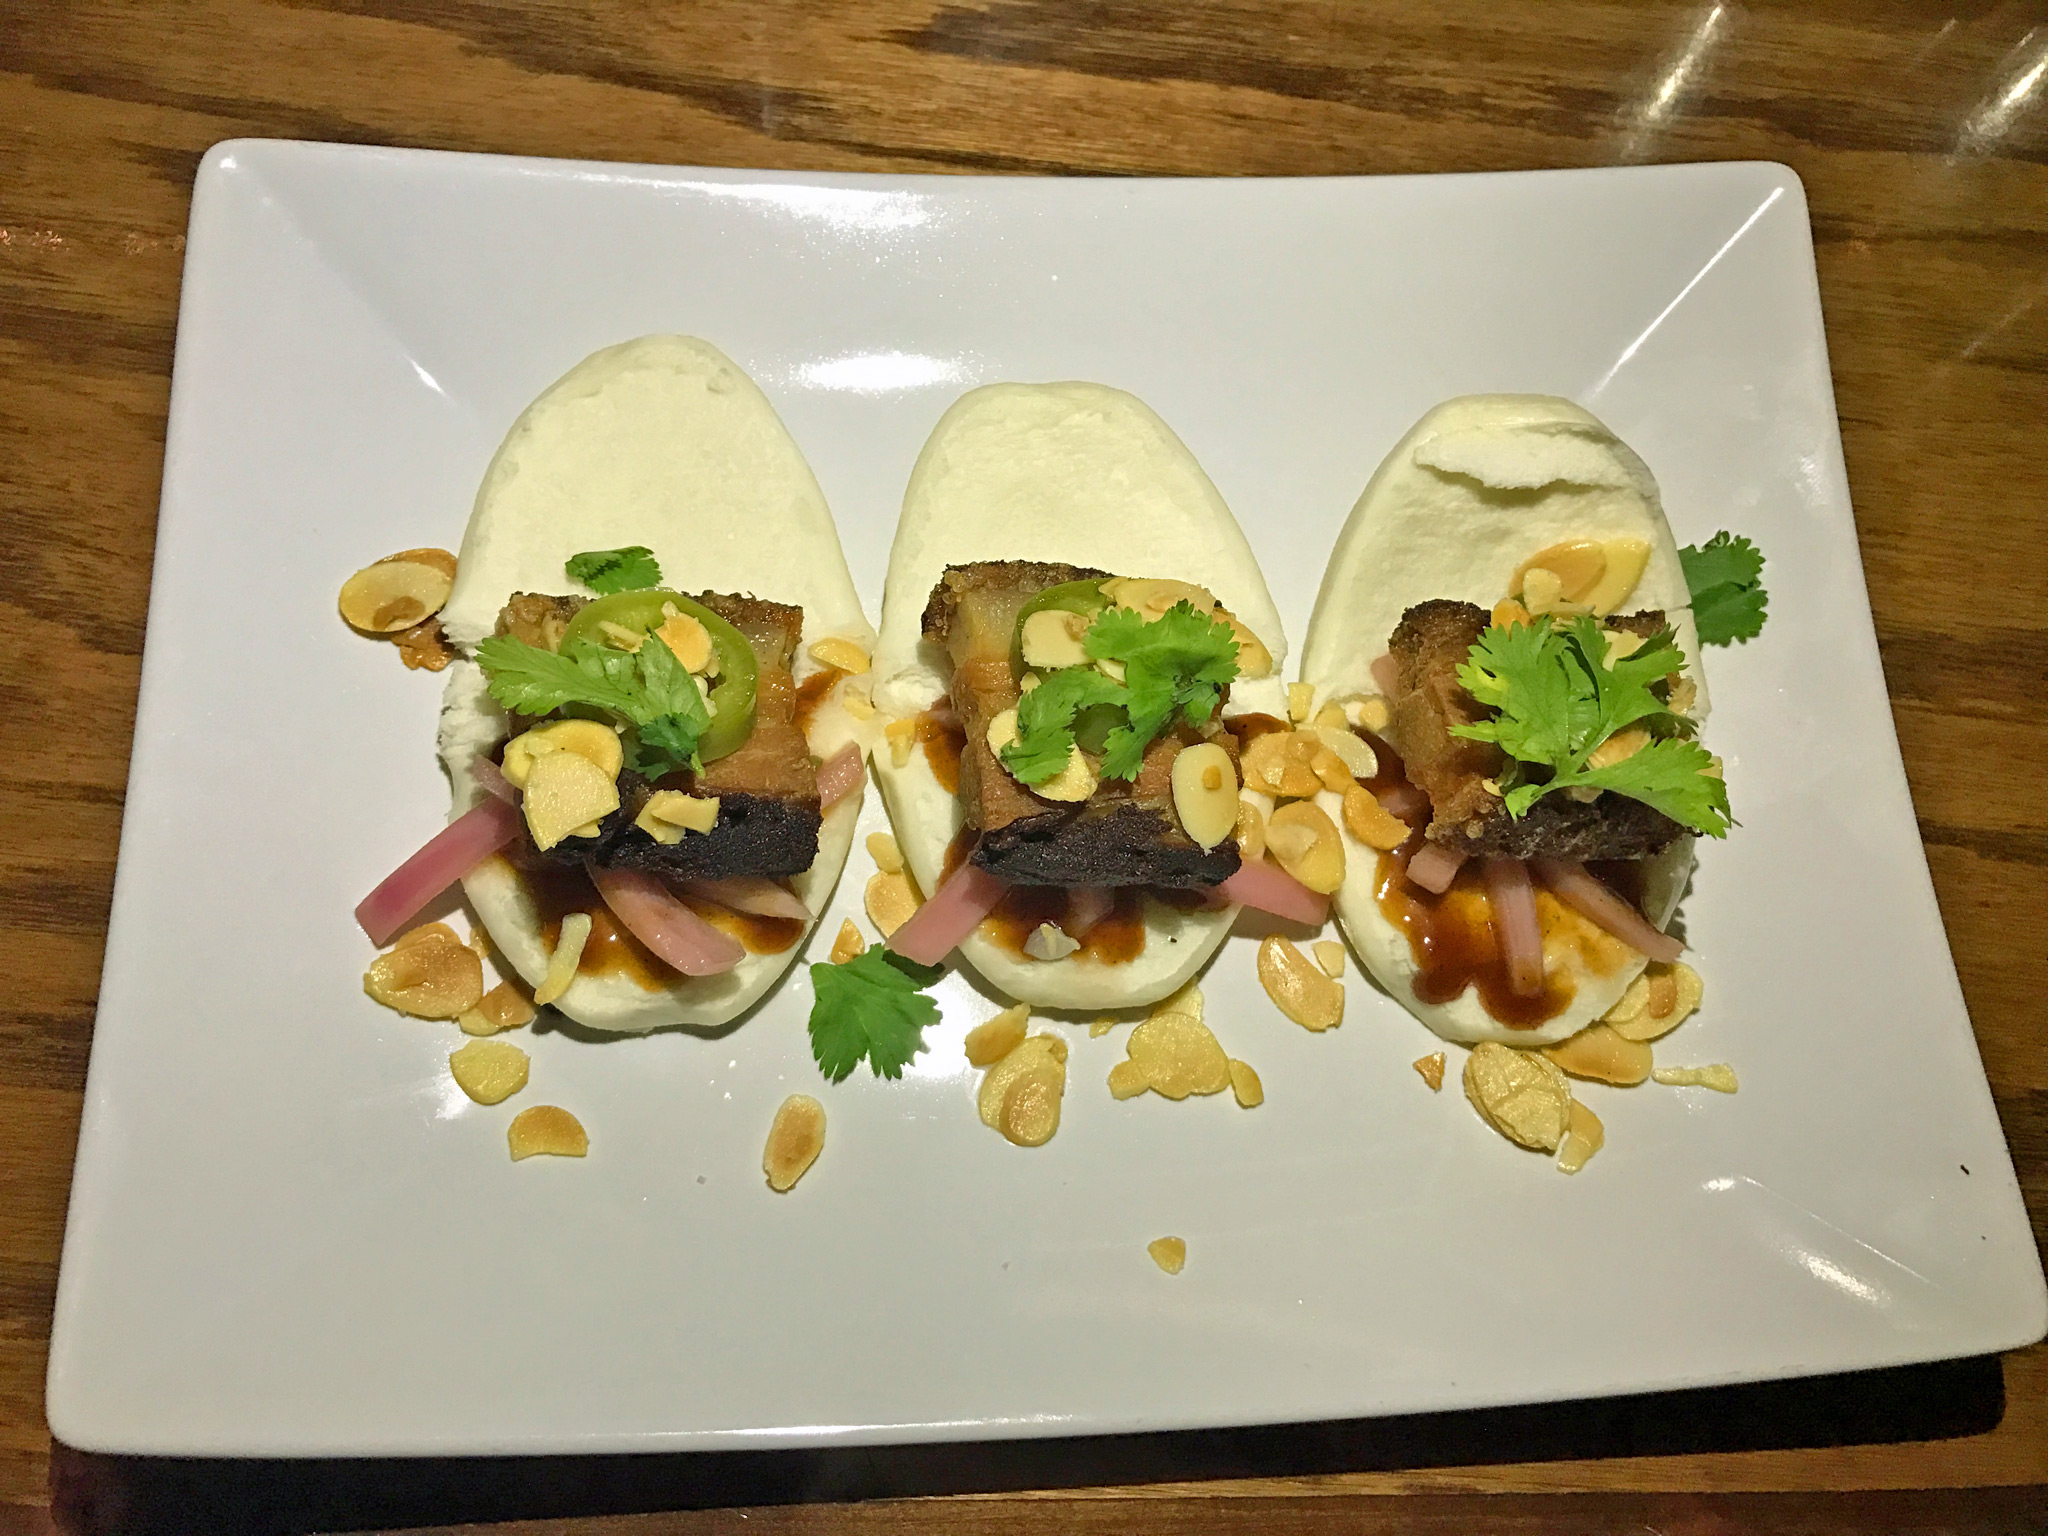 Pork Belly Steamed Buns at Cask & Ale are Excellent